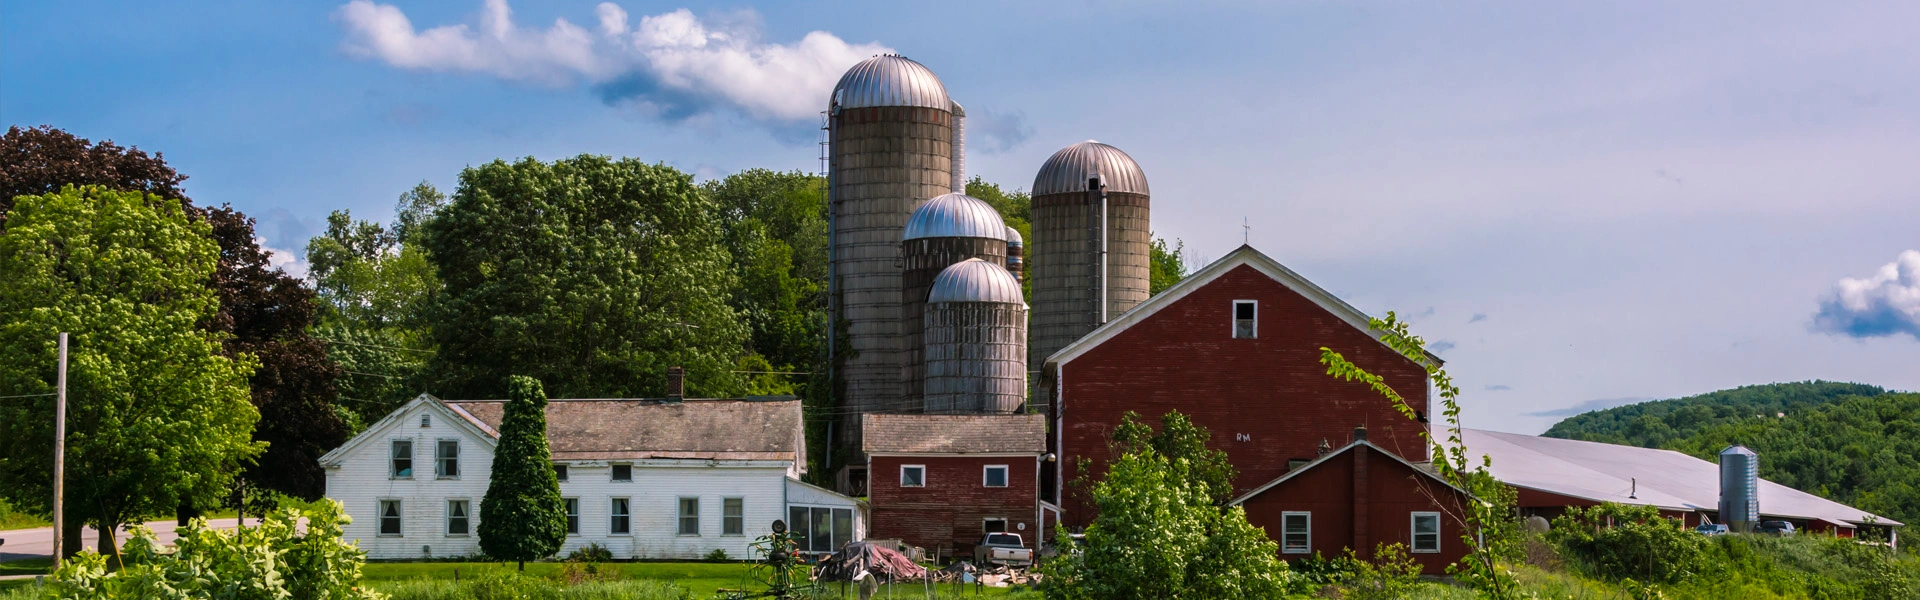 Vermonts Farms and Barns 3